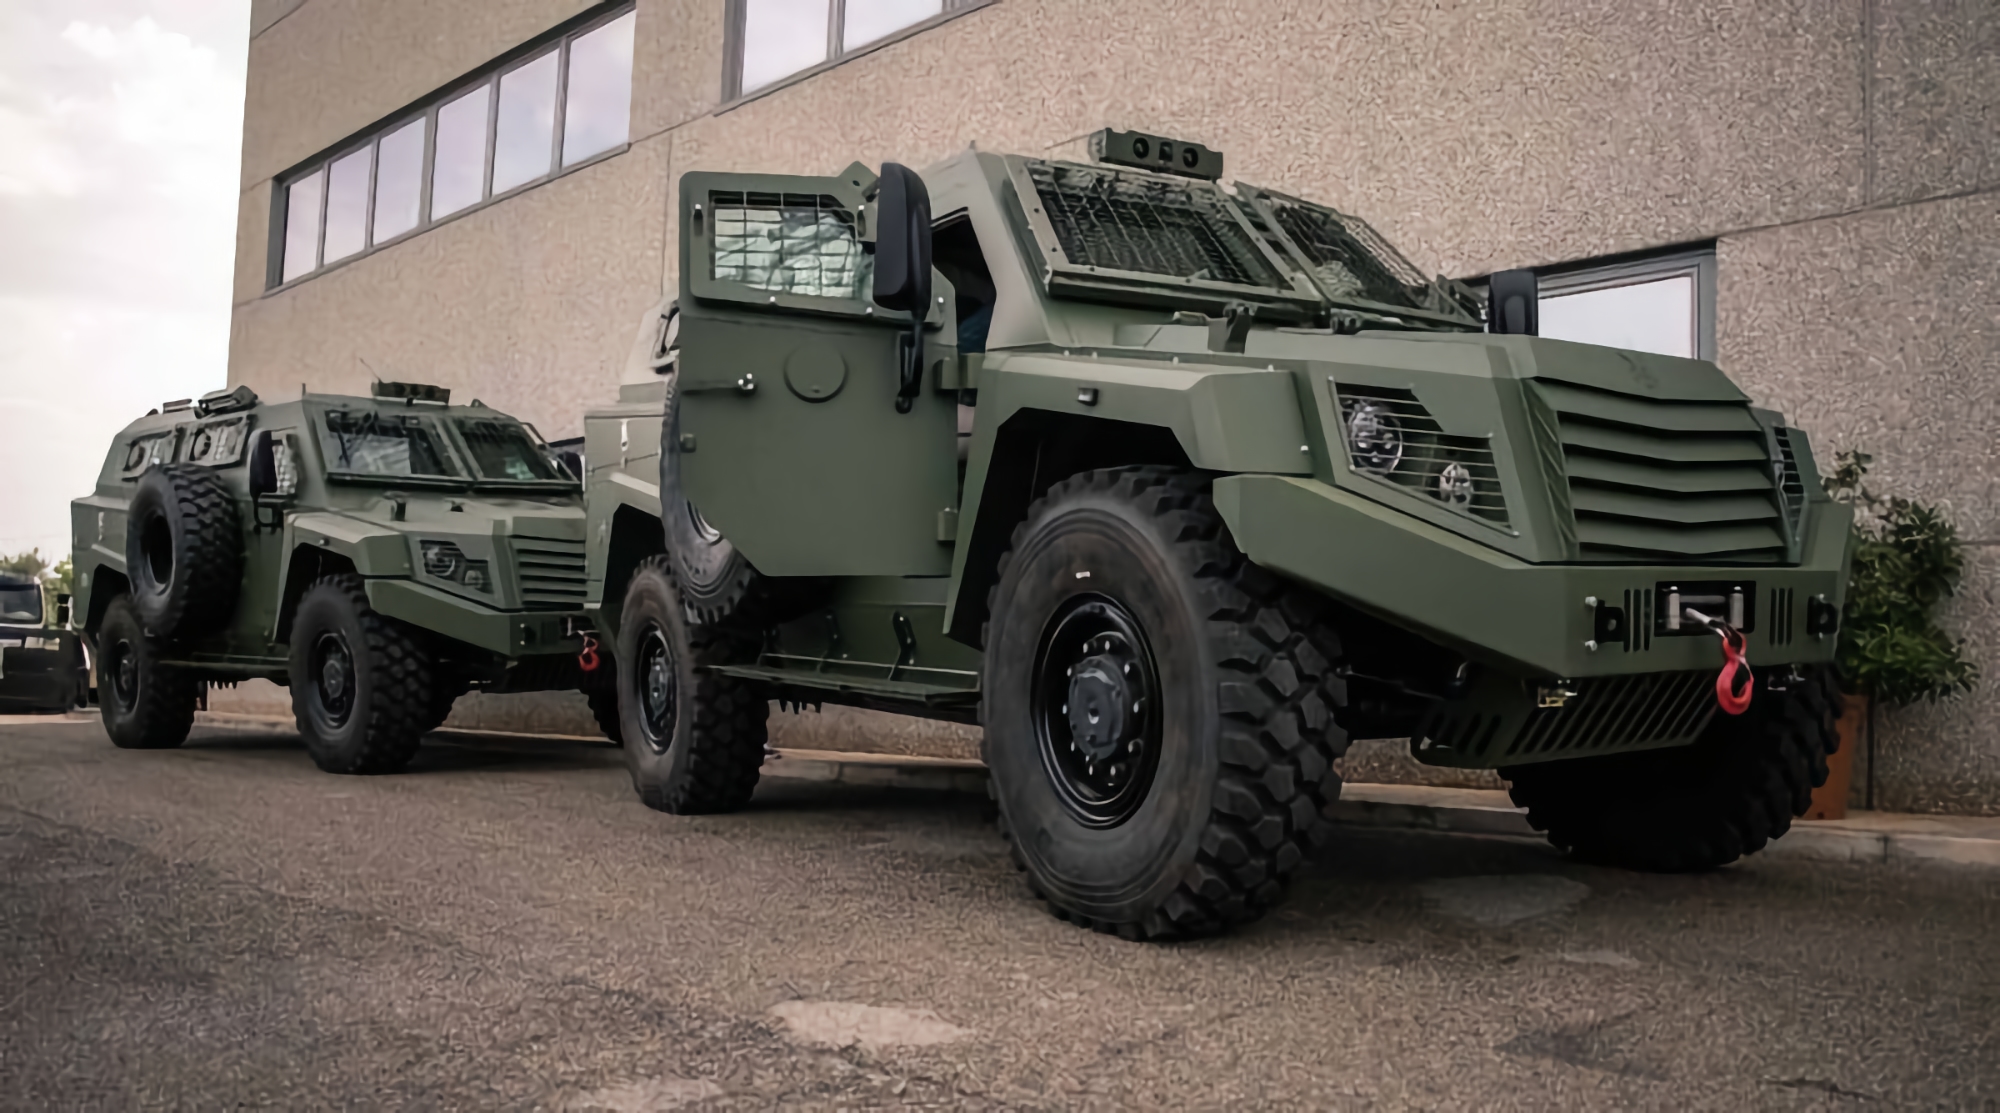 Ukrainian paratroopers received 11 Italian MLS Shield armored vehicles with thermal imaging and surveillance cameras